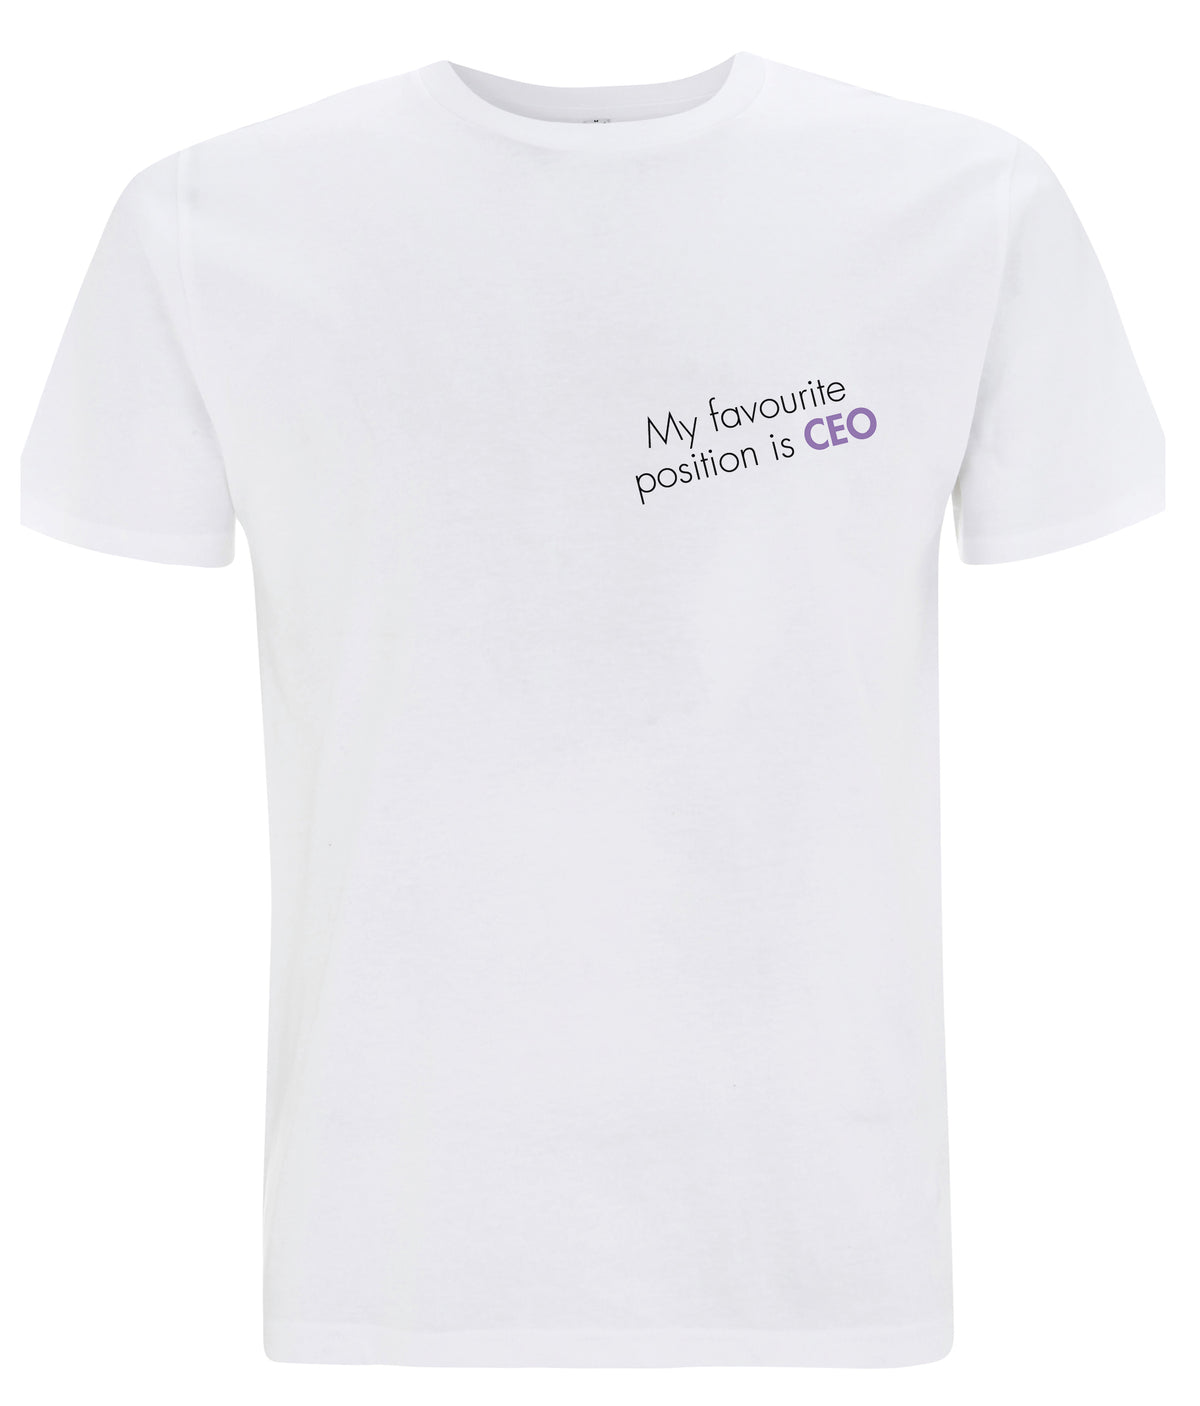 My Favourite Position Is CEO Organic Feminist T Shirt White